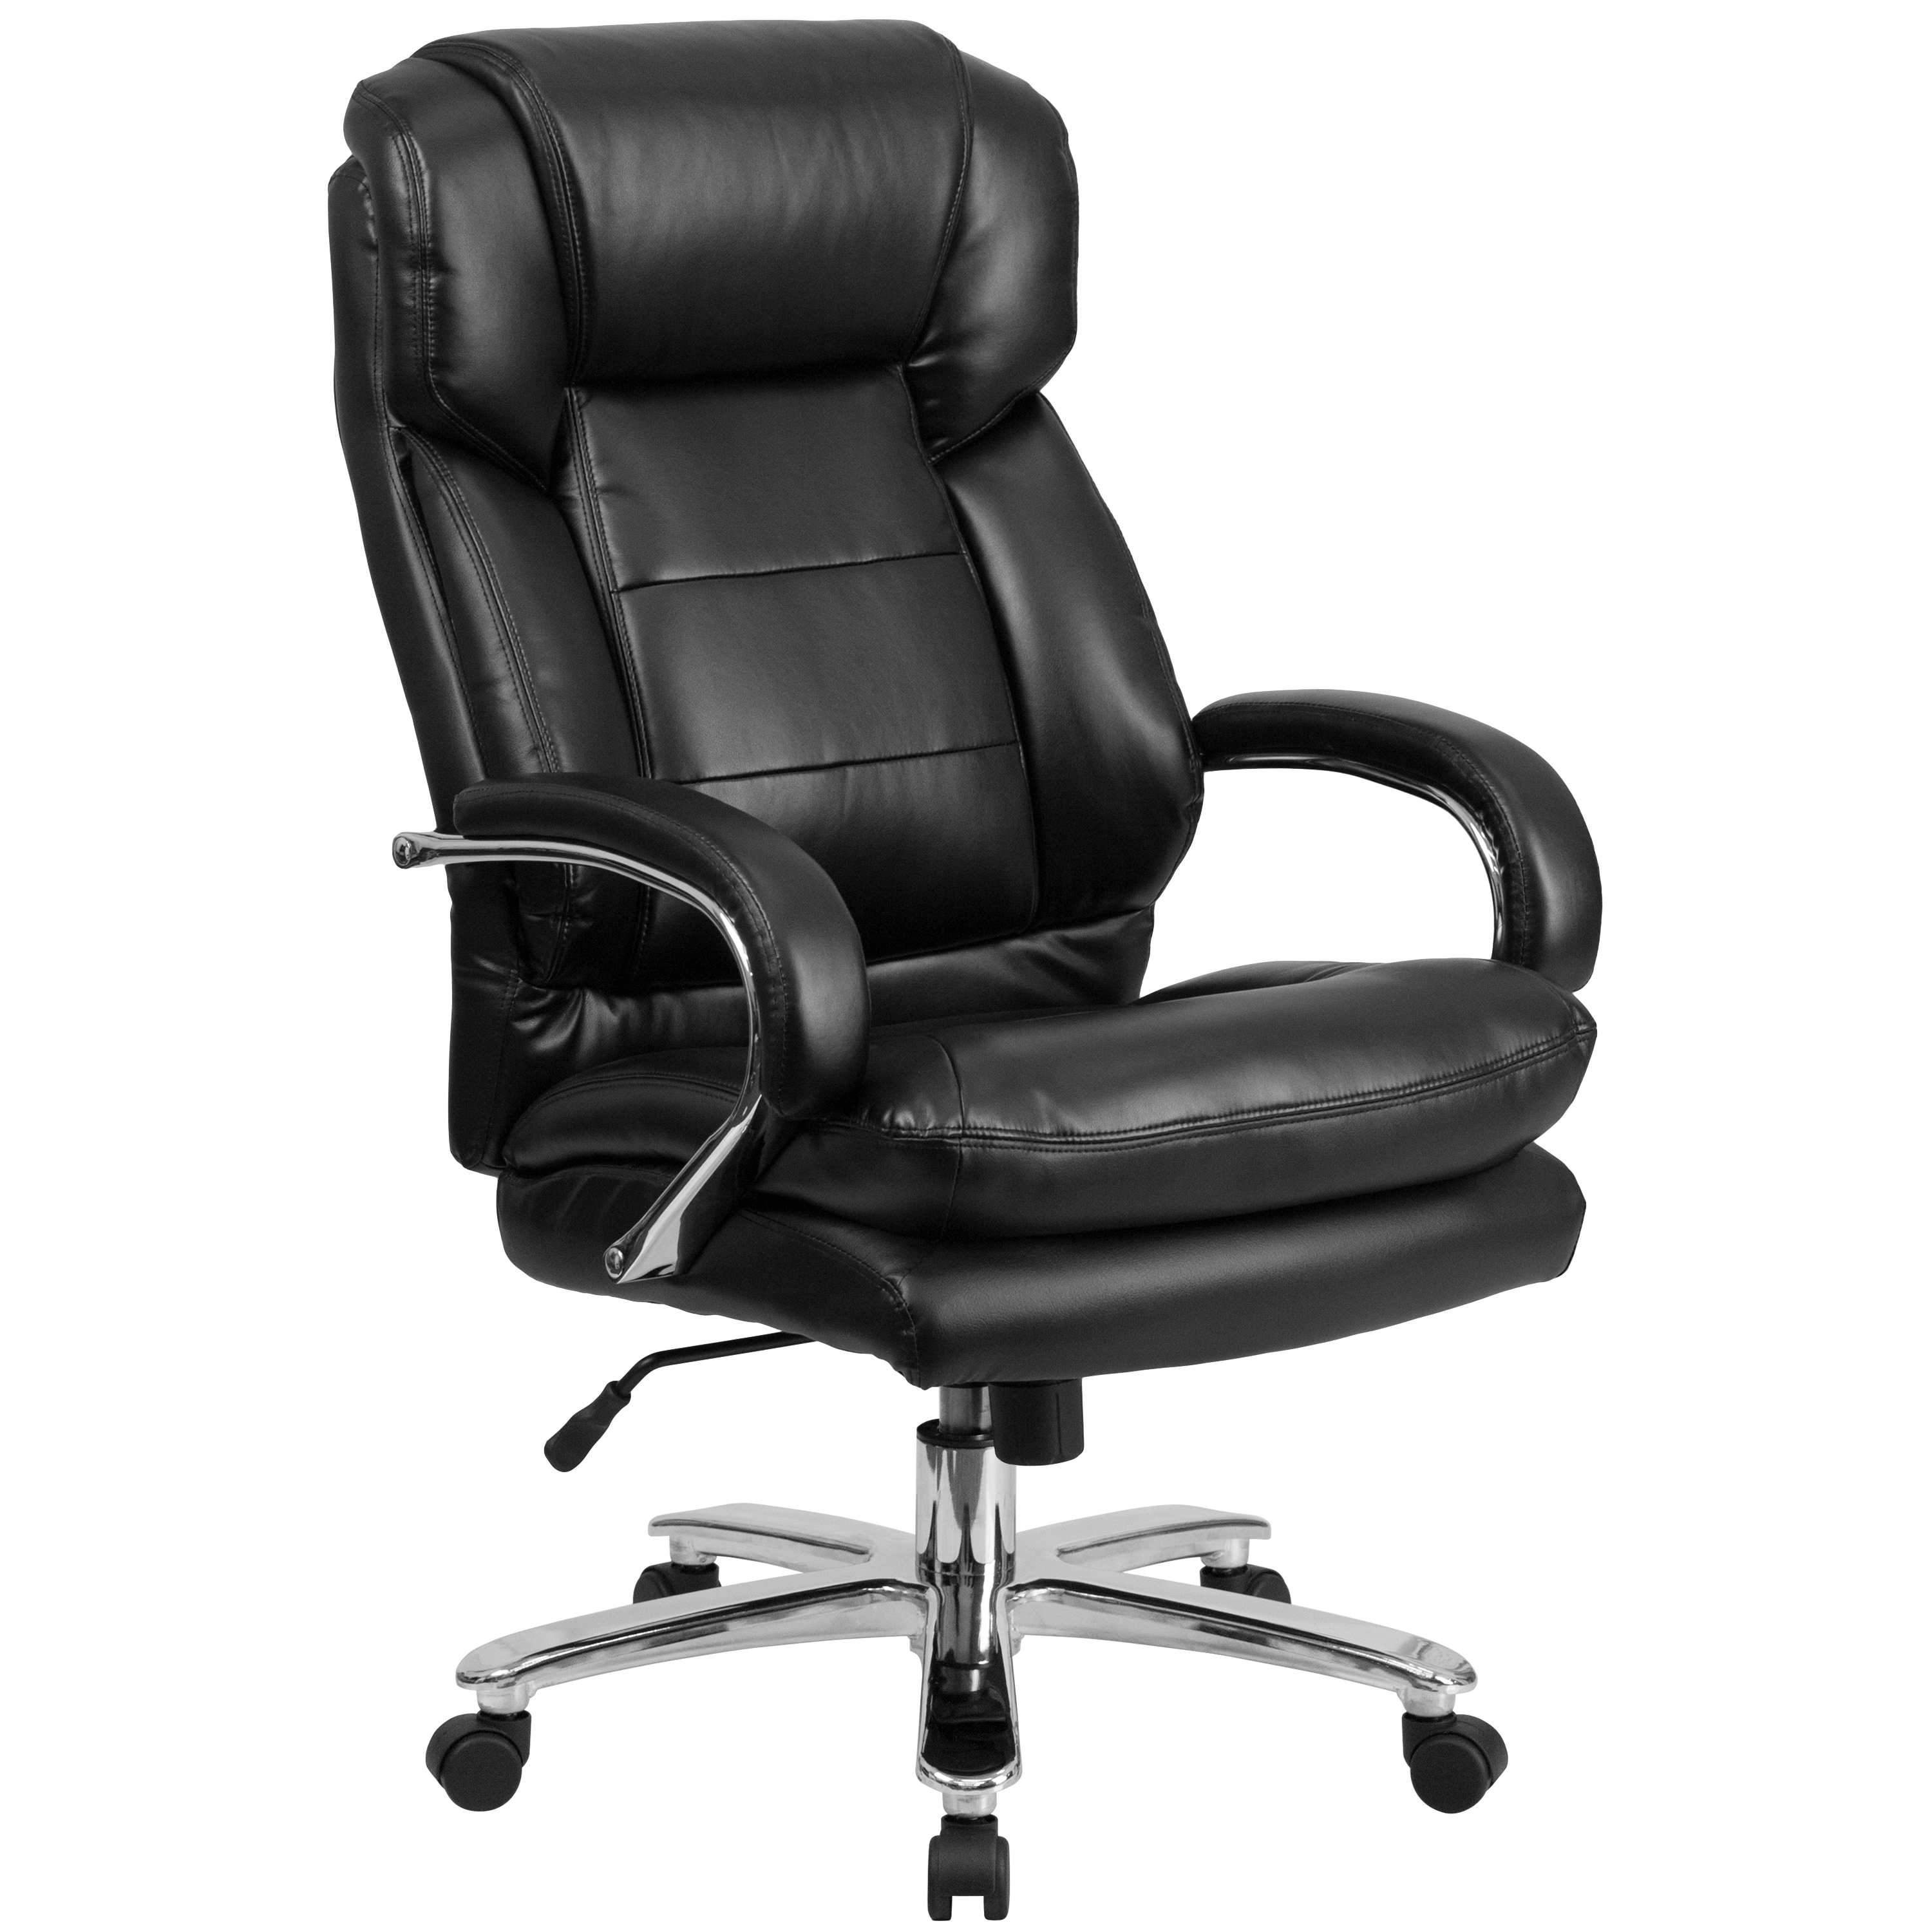 Swivel Desk Chair In The Office Chairs, Leather Swivel Office Chair